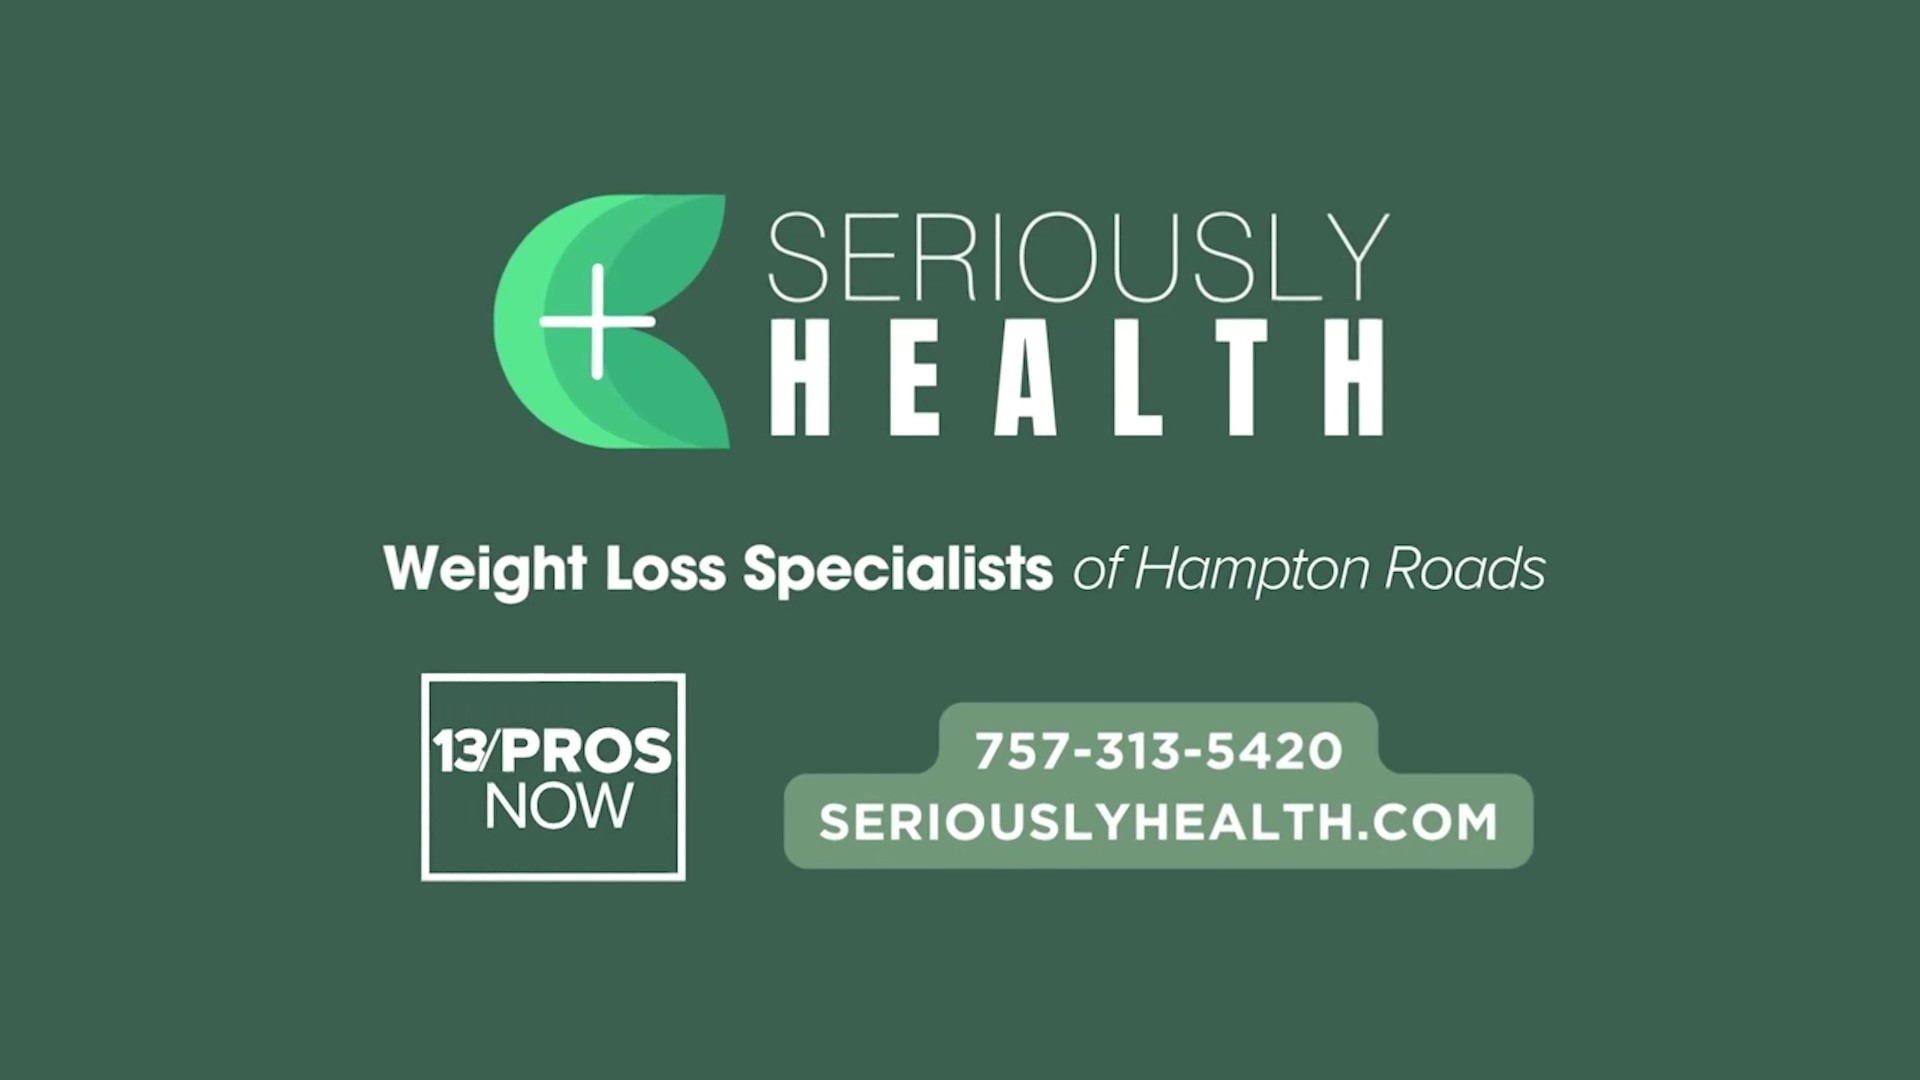 Dr. Patrick Pagador MD & his team of medical specialists provide expert treatment for weight loss and obesity, utilizing oral and injectable weight loss medications.